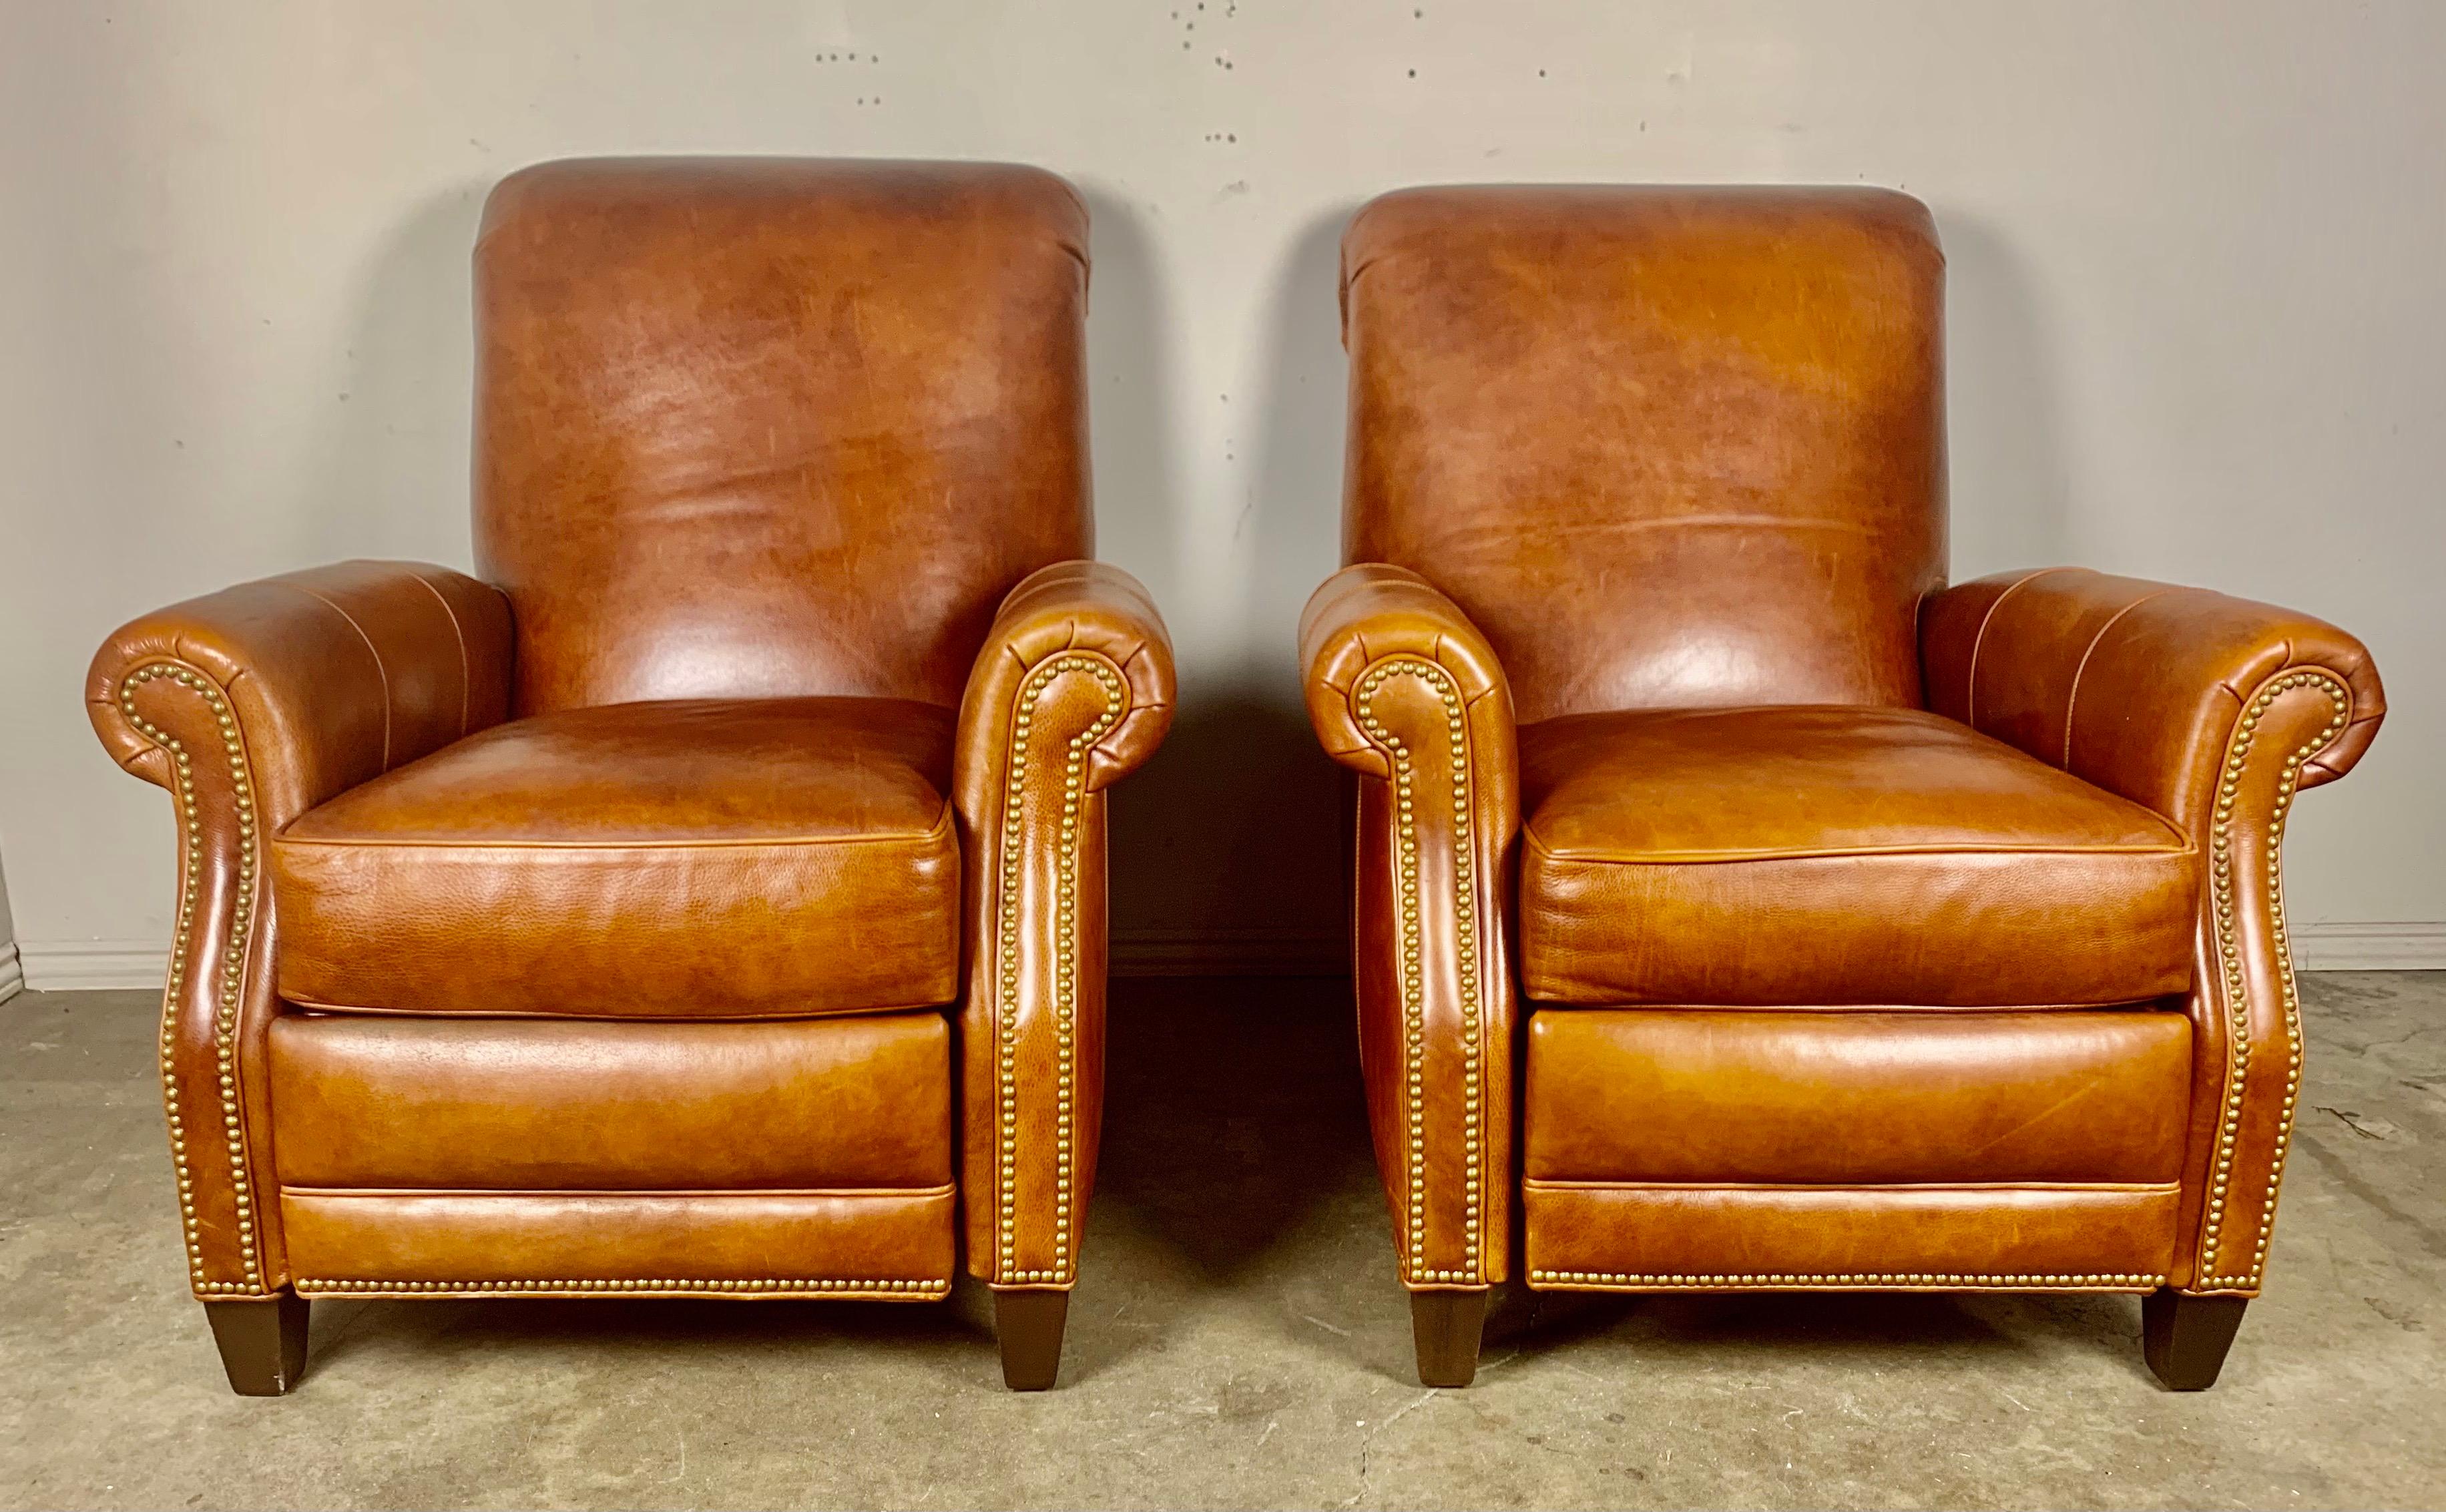 Pair of leather recliner armchairs. This pair of tobacco colored leather armchairs have a reclining mechanism as depicted in photos. This elegant pair of leather armchairs are detailed with nail heads. The armchairs stand on four wood tapered legs